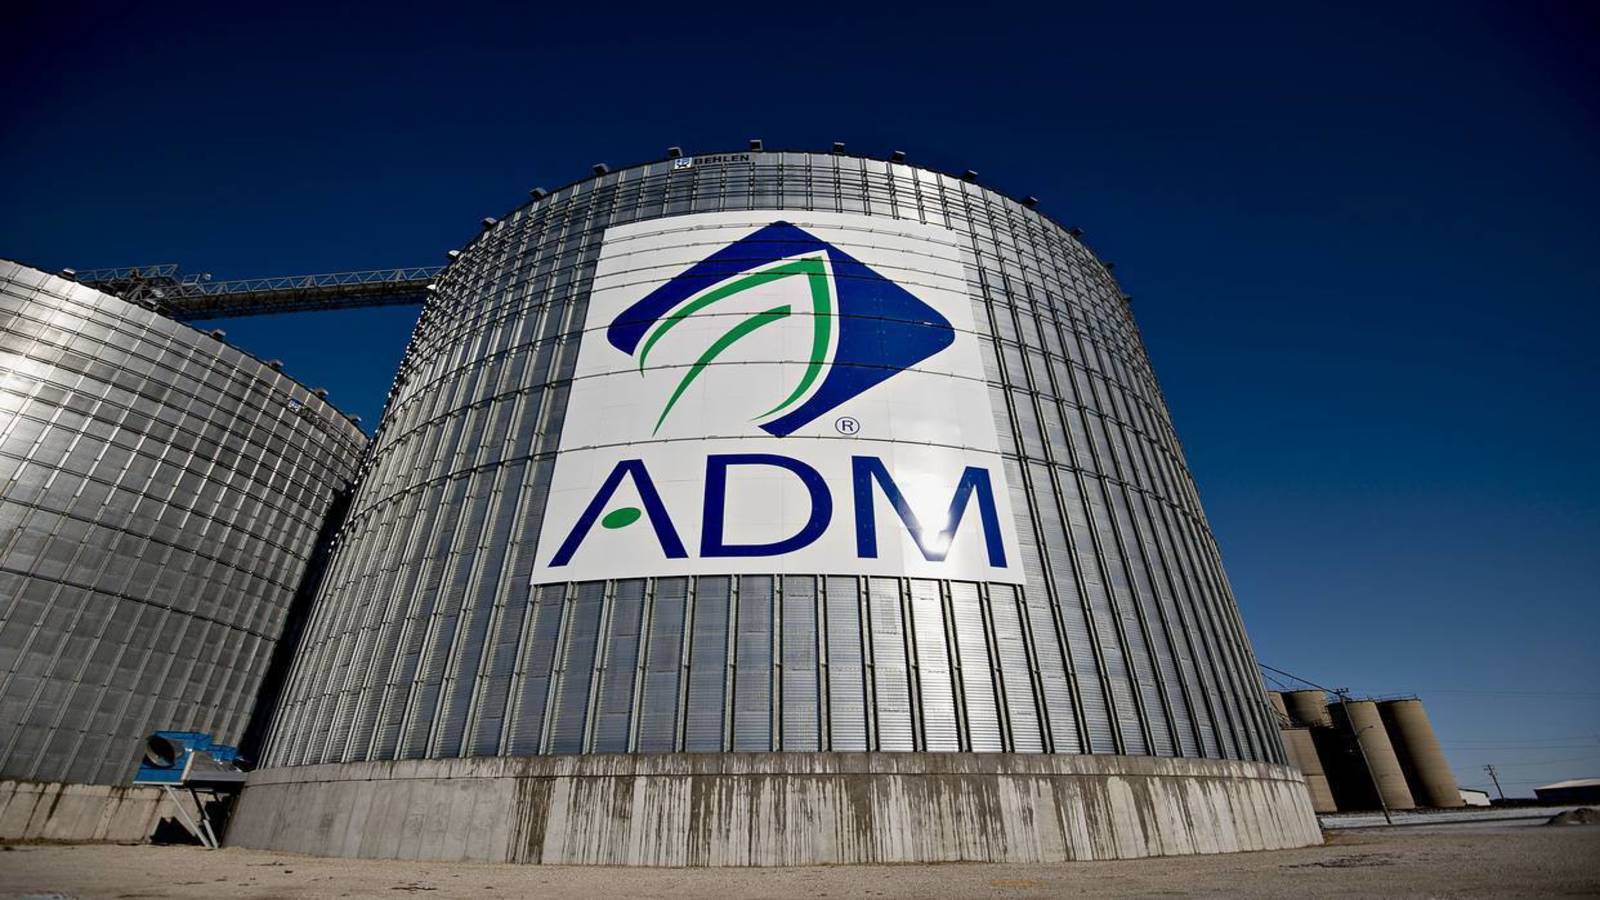 ADM to invest US$350m in soybean crashing capacity to meet rising demand